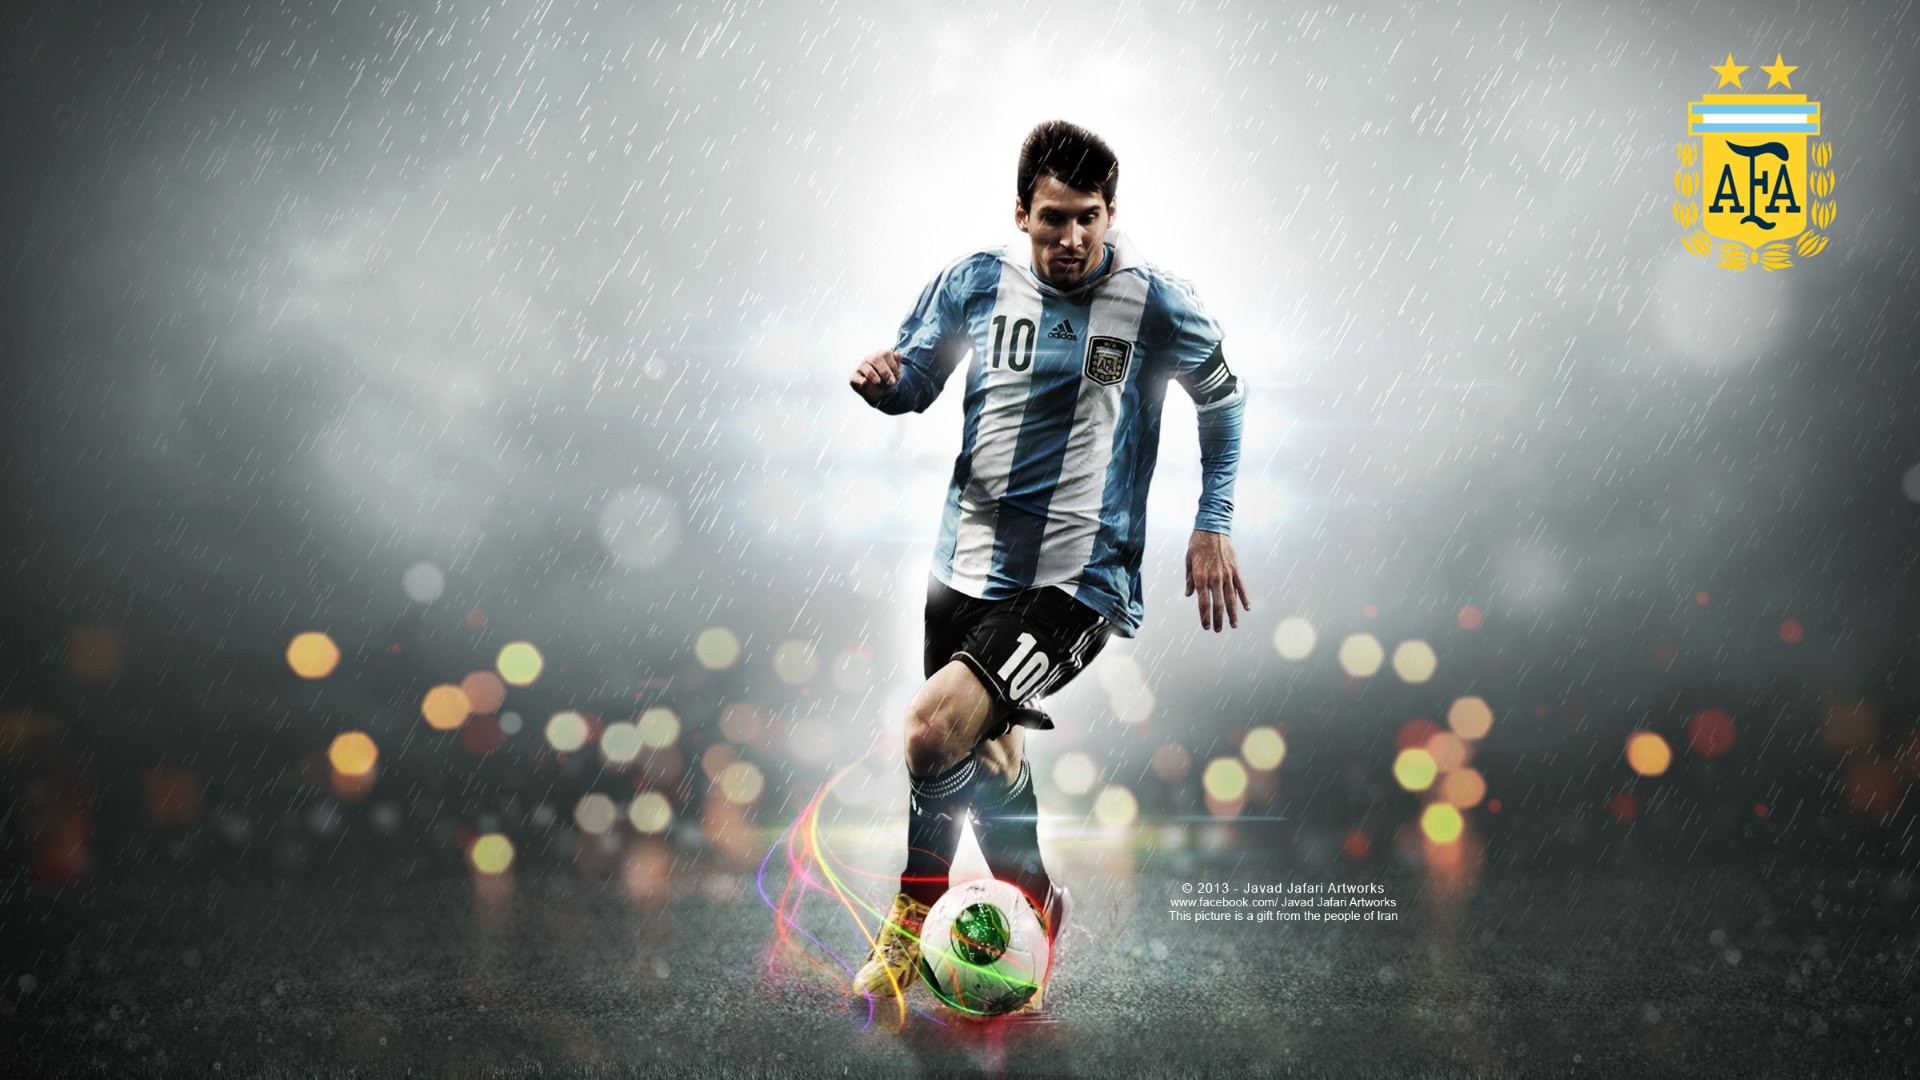 Wallpapers Messi Argentina with resolution 1920x1080 pixel. You can make this wallpaper for your Mac or Windows Desktop Background, iPhone, Android or Tablet and another Smartphone device